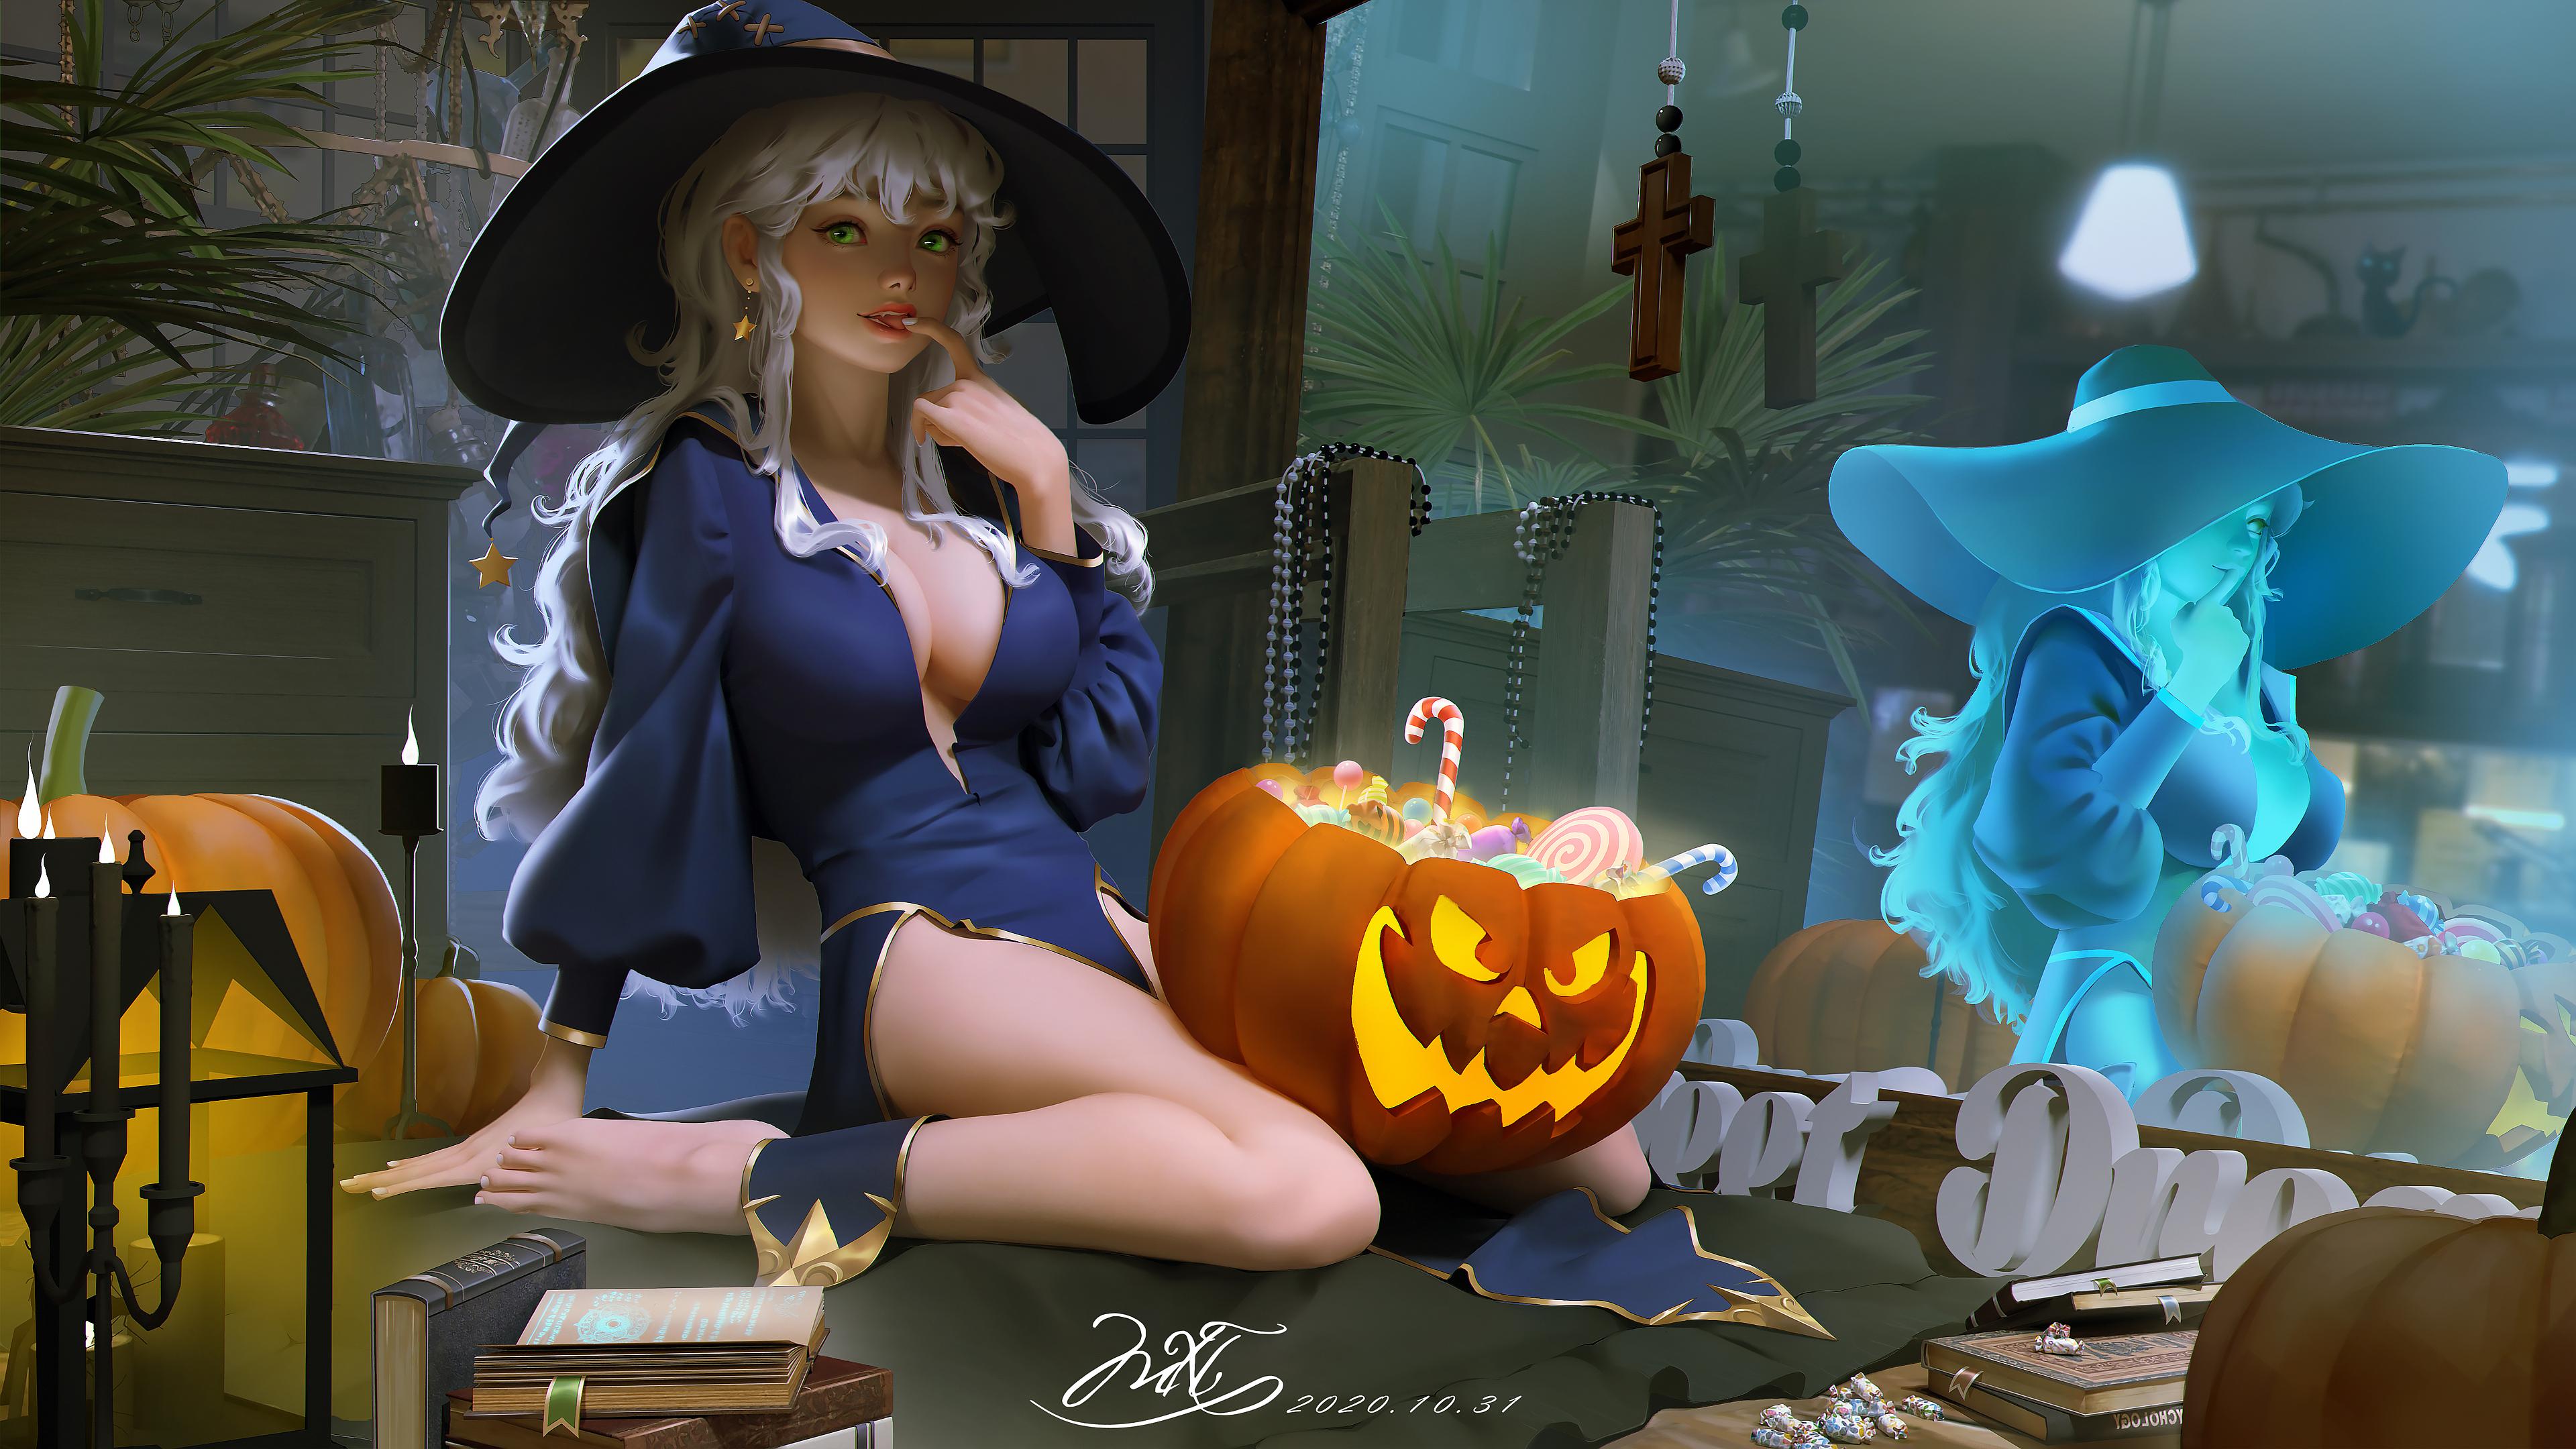 Anime 3840x2160 anime girls Halloween cleavage hat candy sweets reflection witch hat pumpkin digital art cross candles